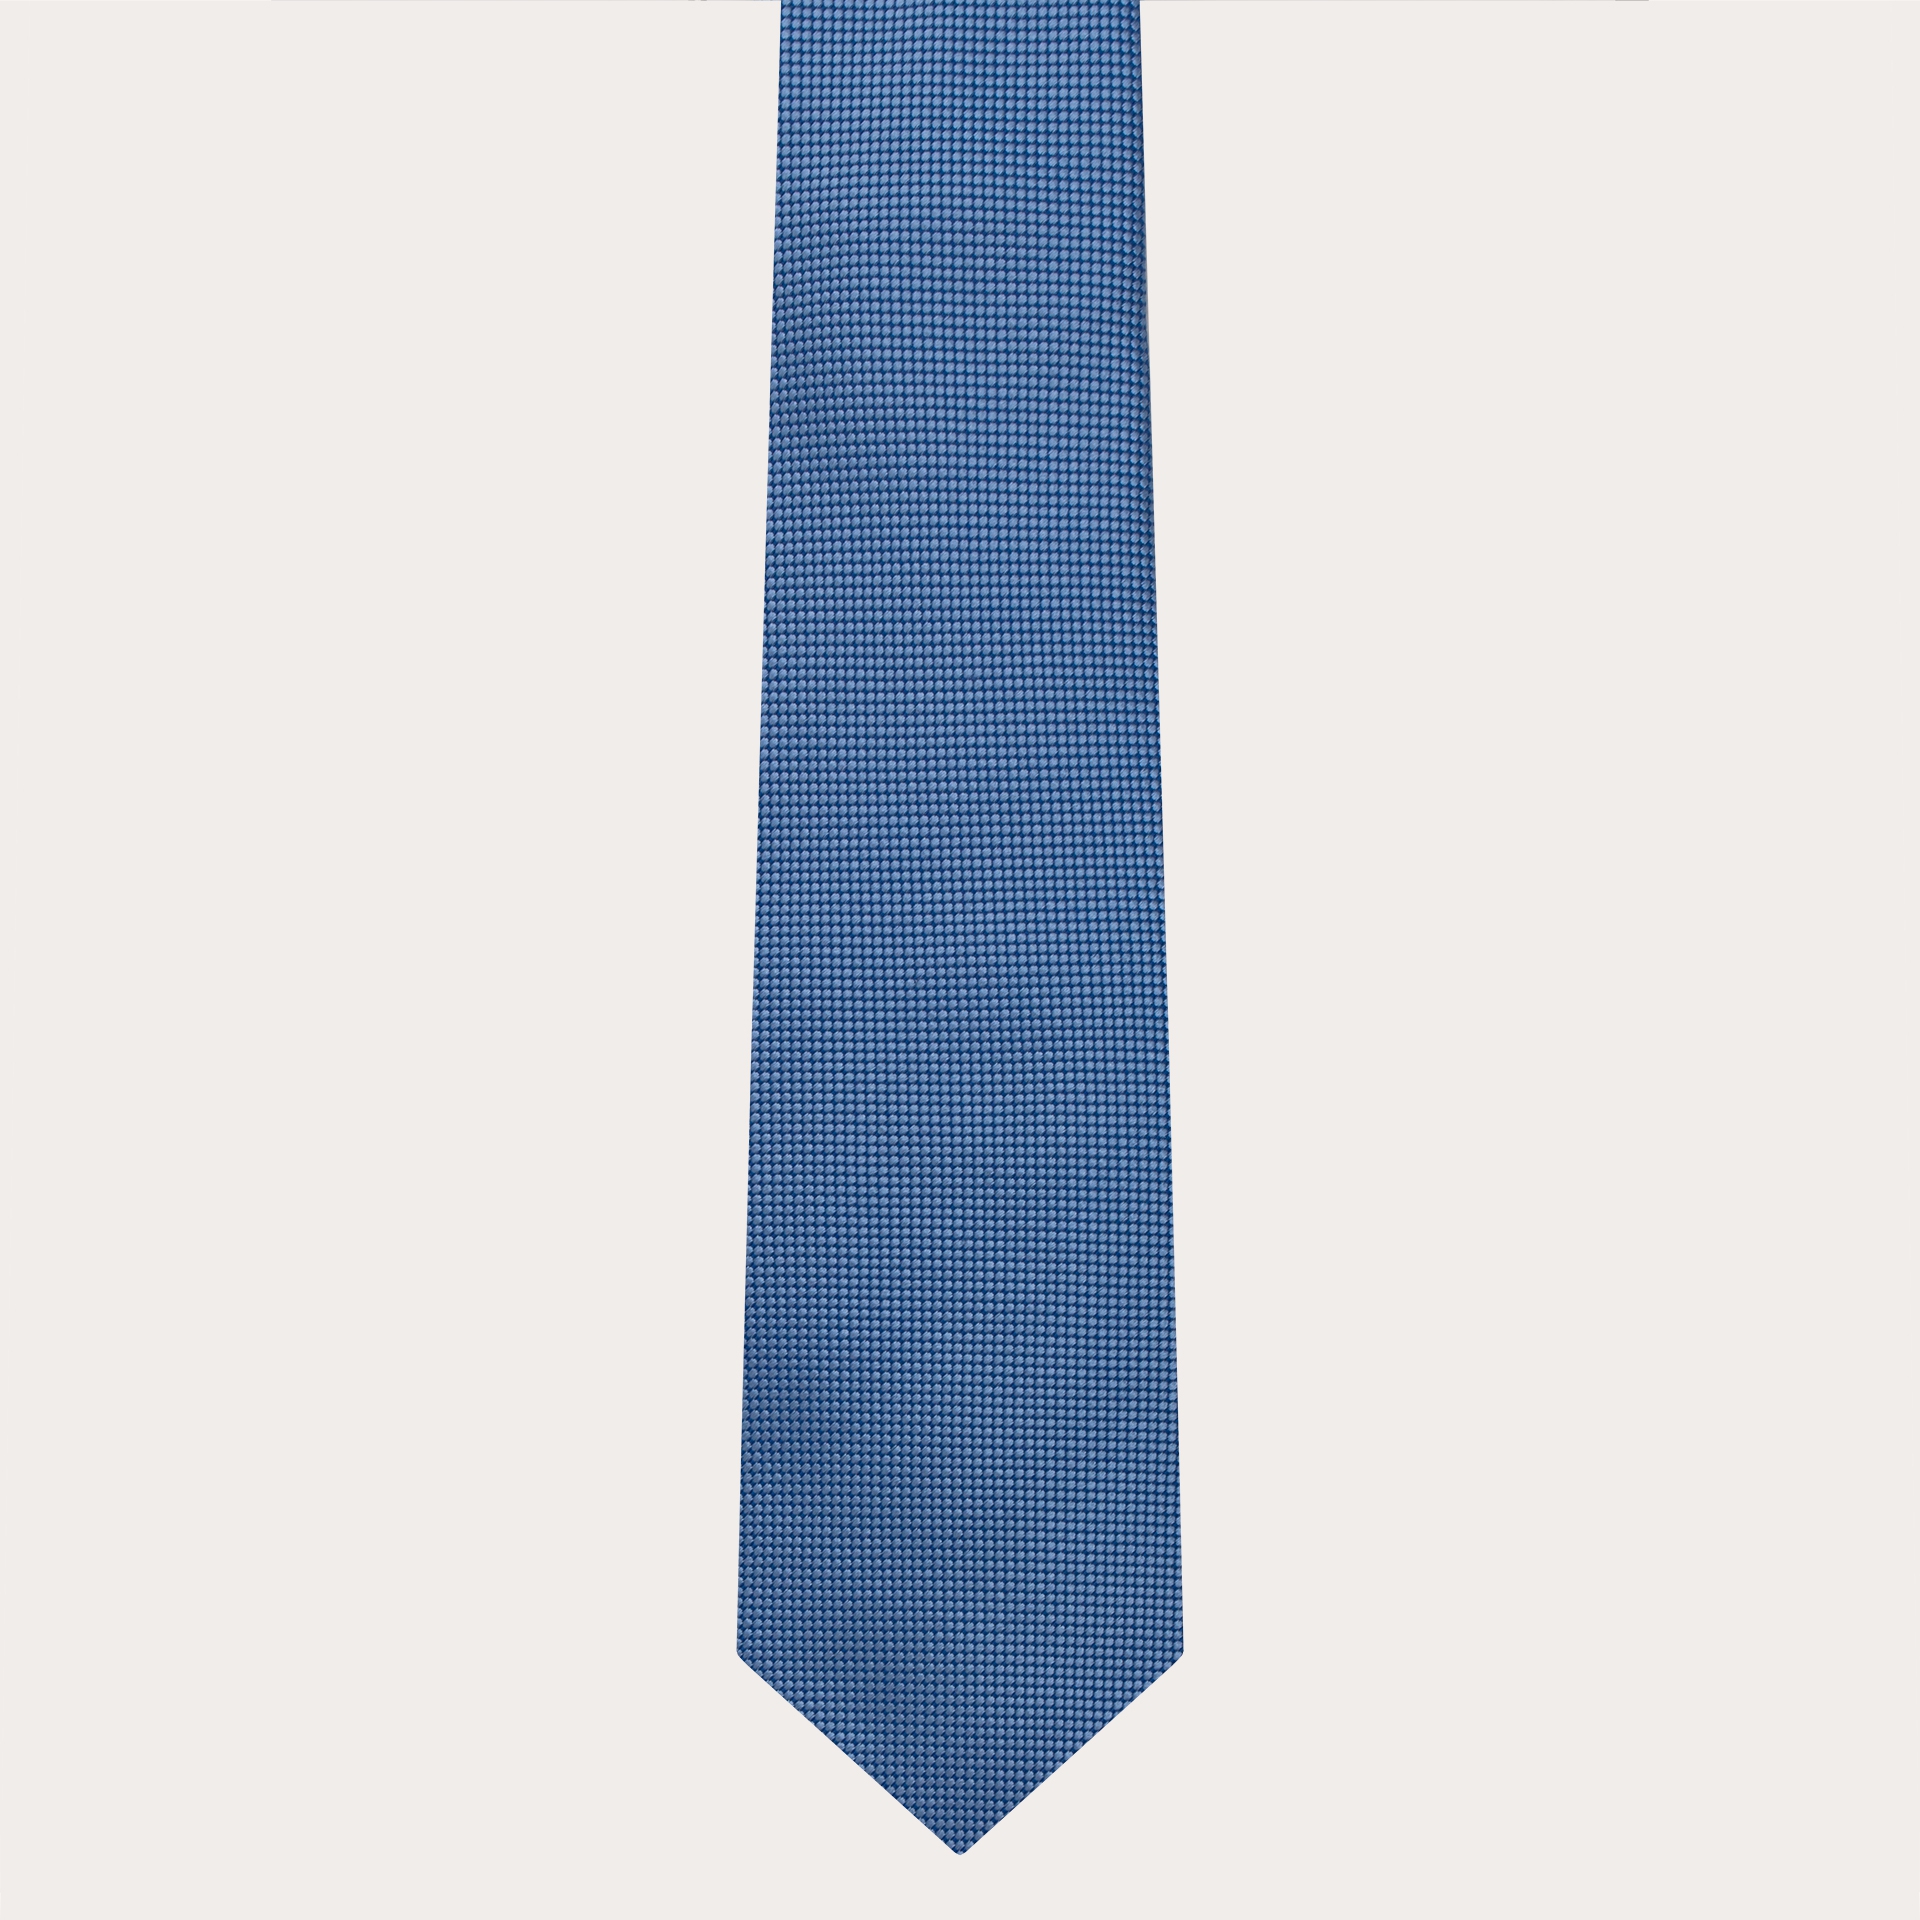 Ceremony tie in jacquard silk, light blue dotted pattern